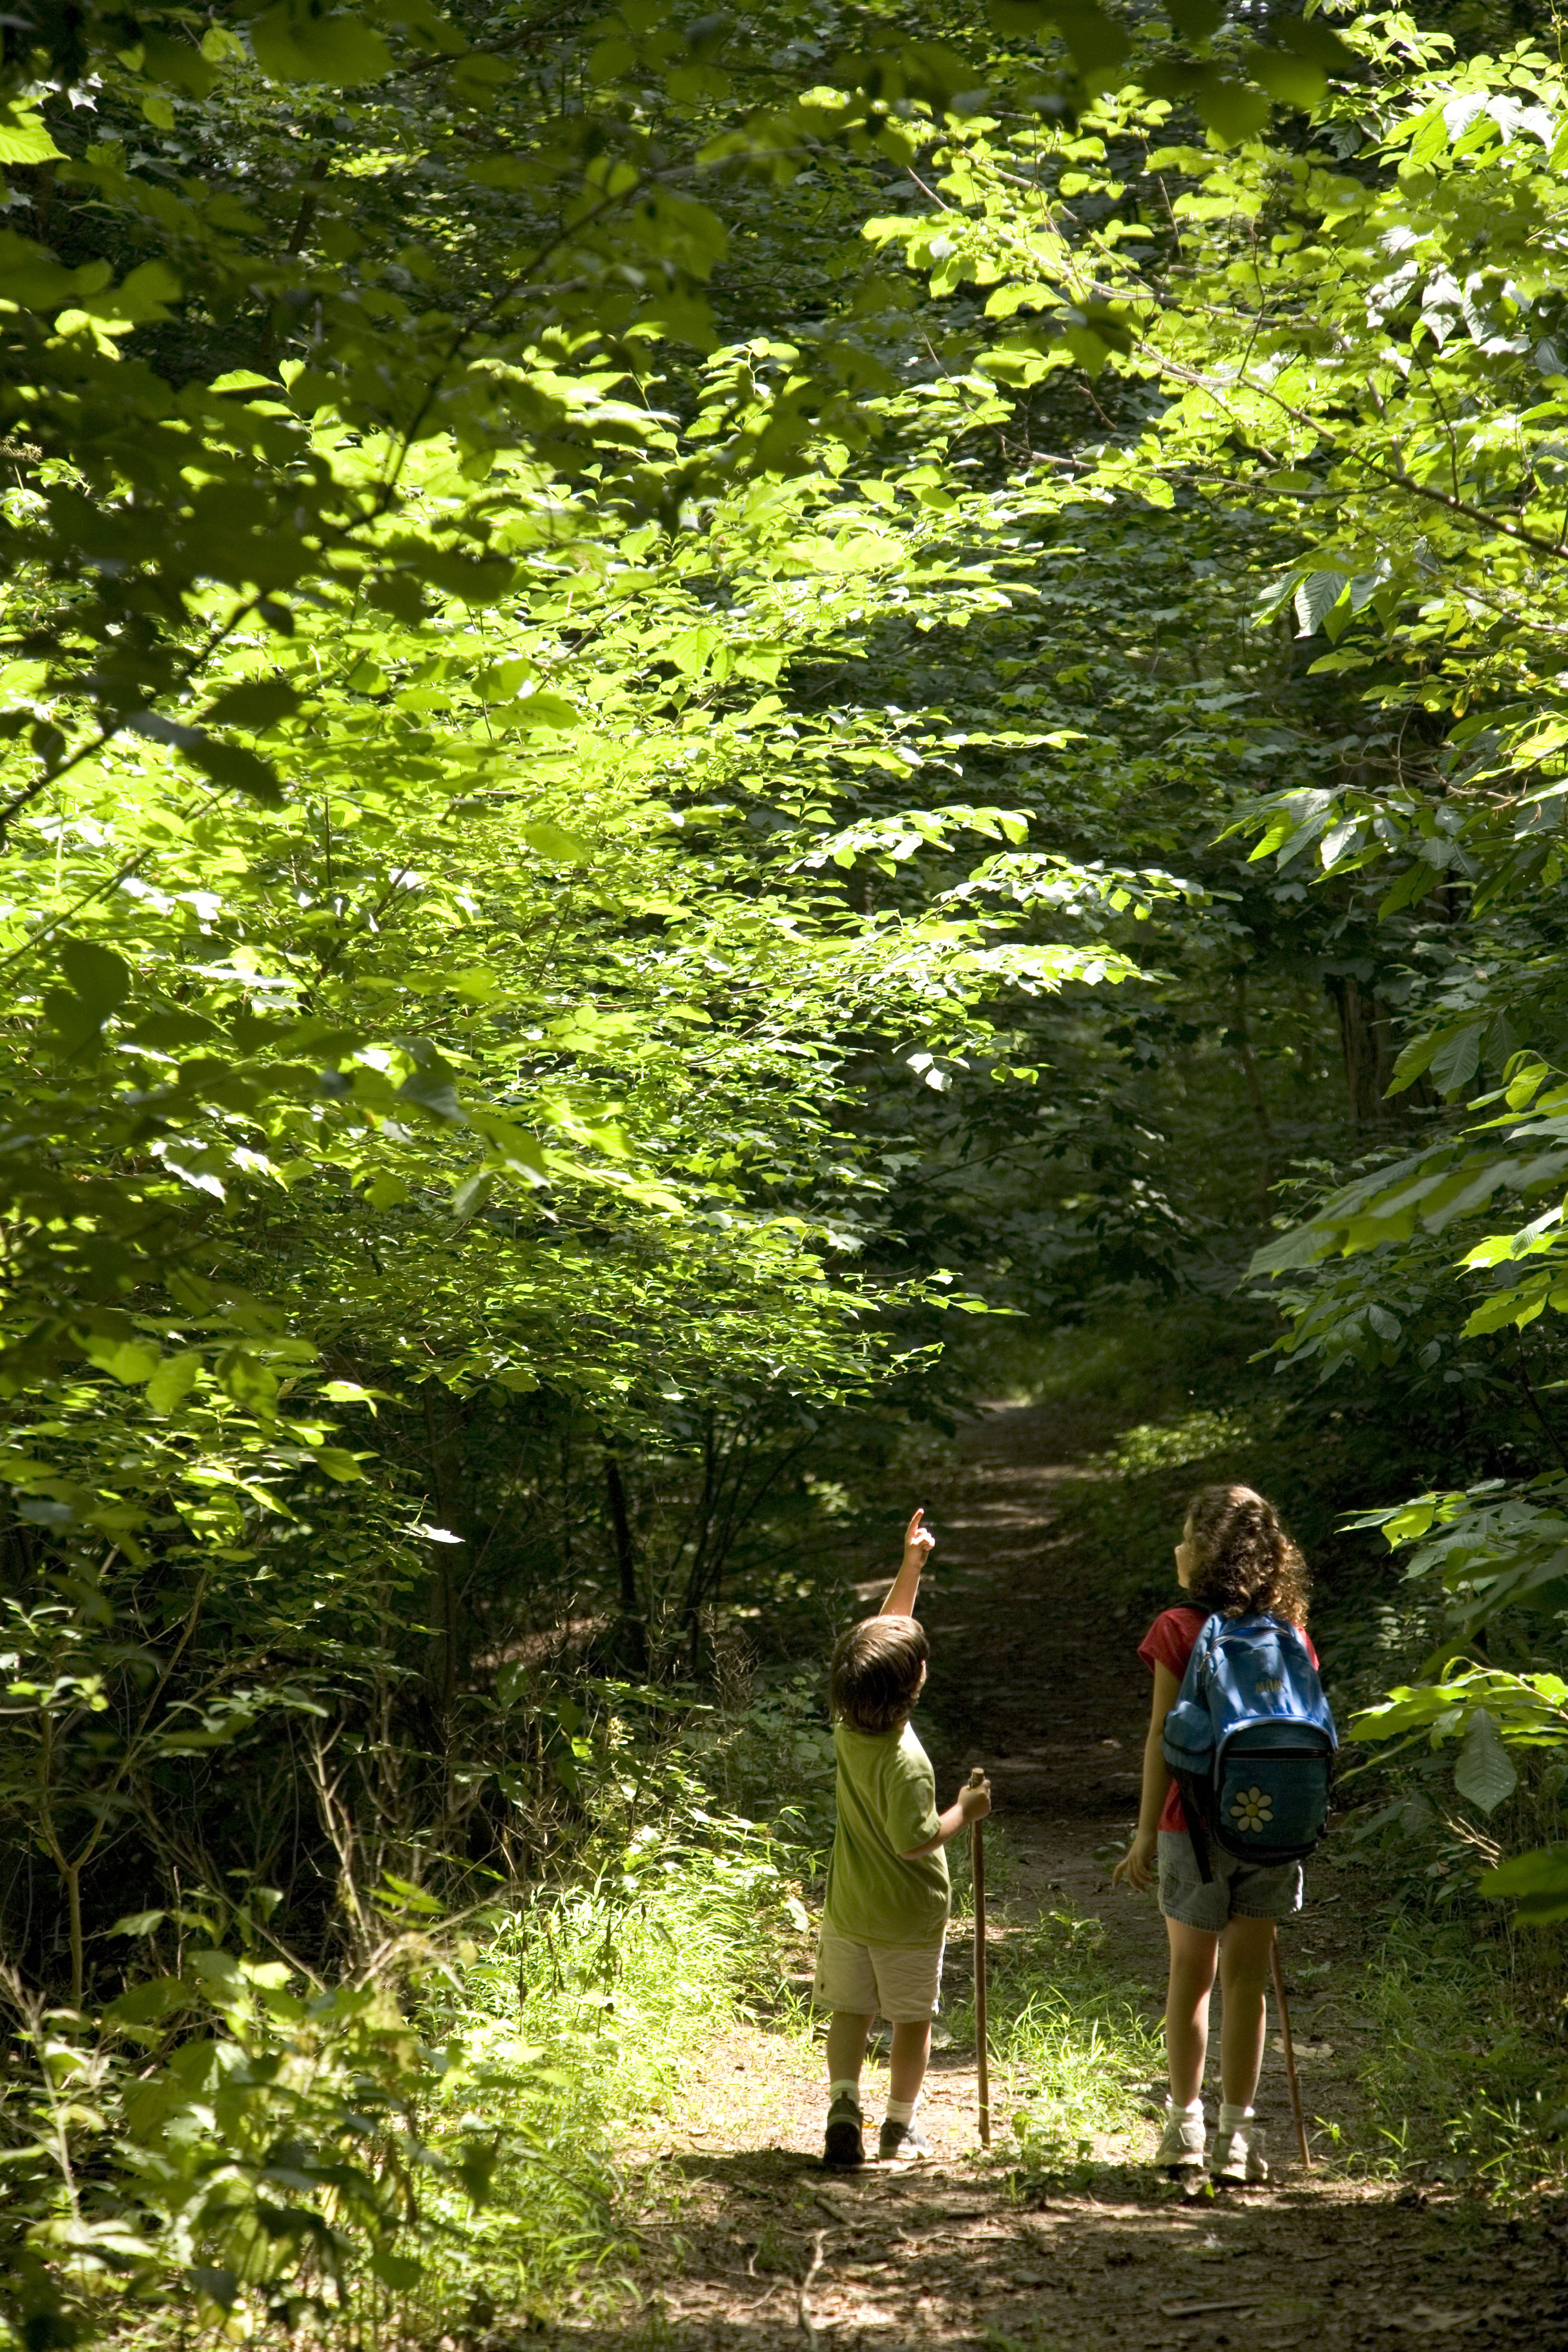 Children walking on a wooded path